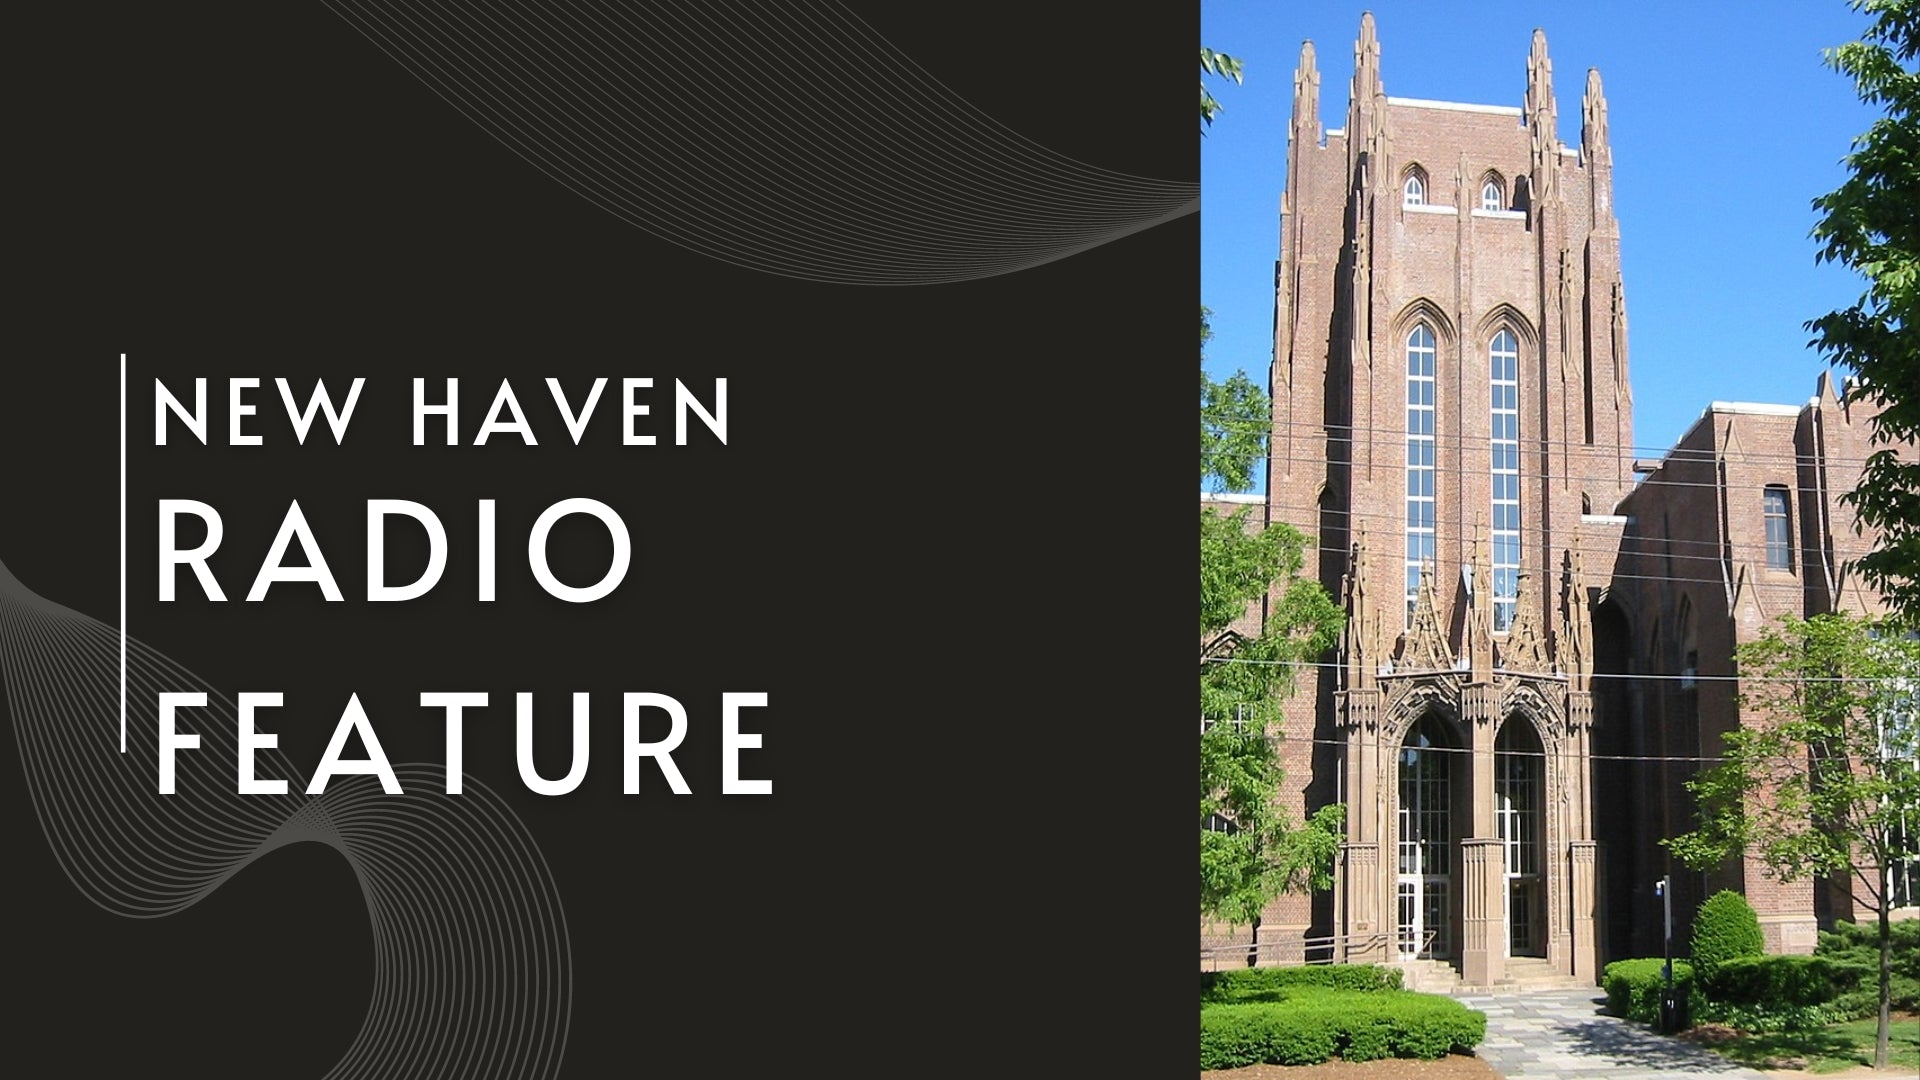 What's The Best Radio For New Haven: A Comprehensive Guide